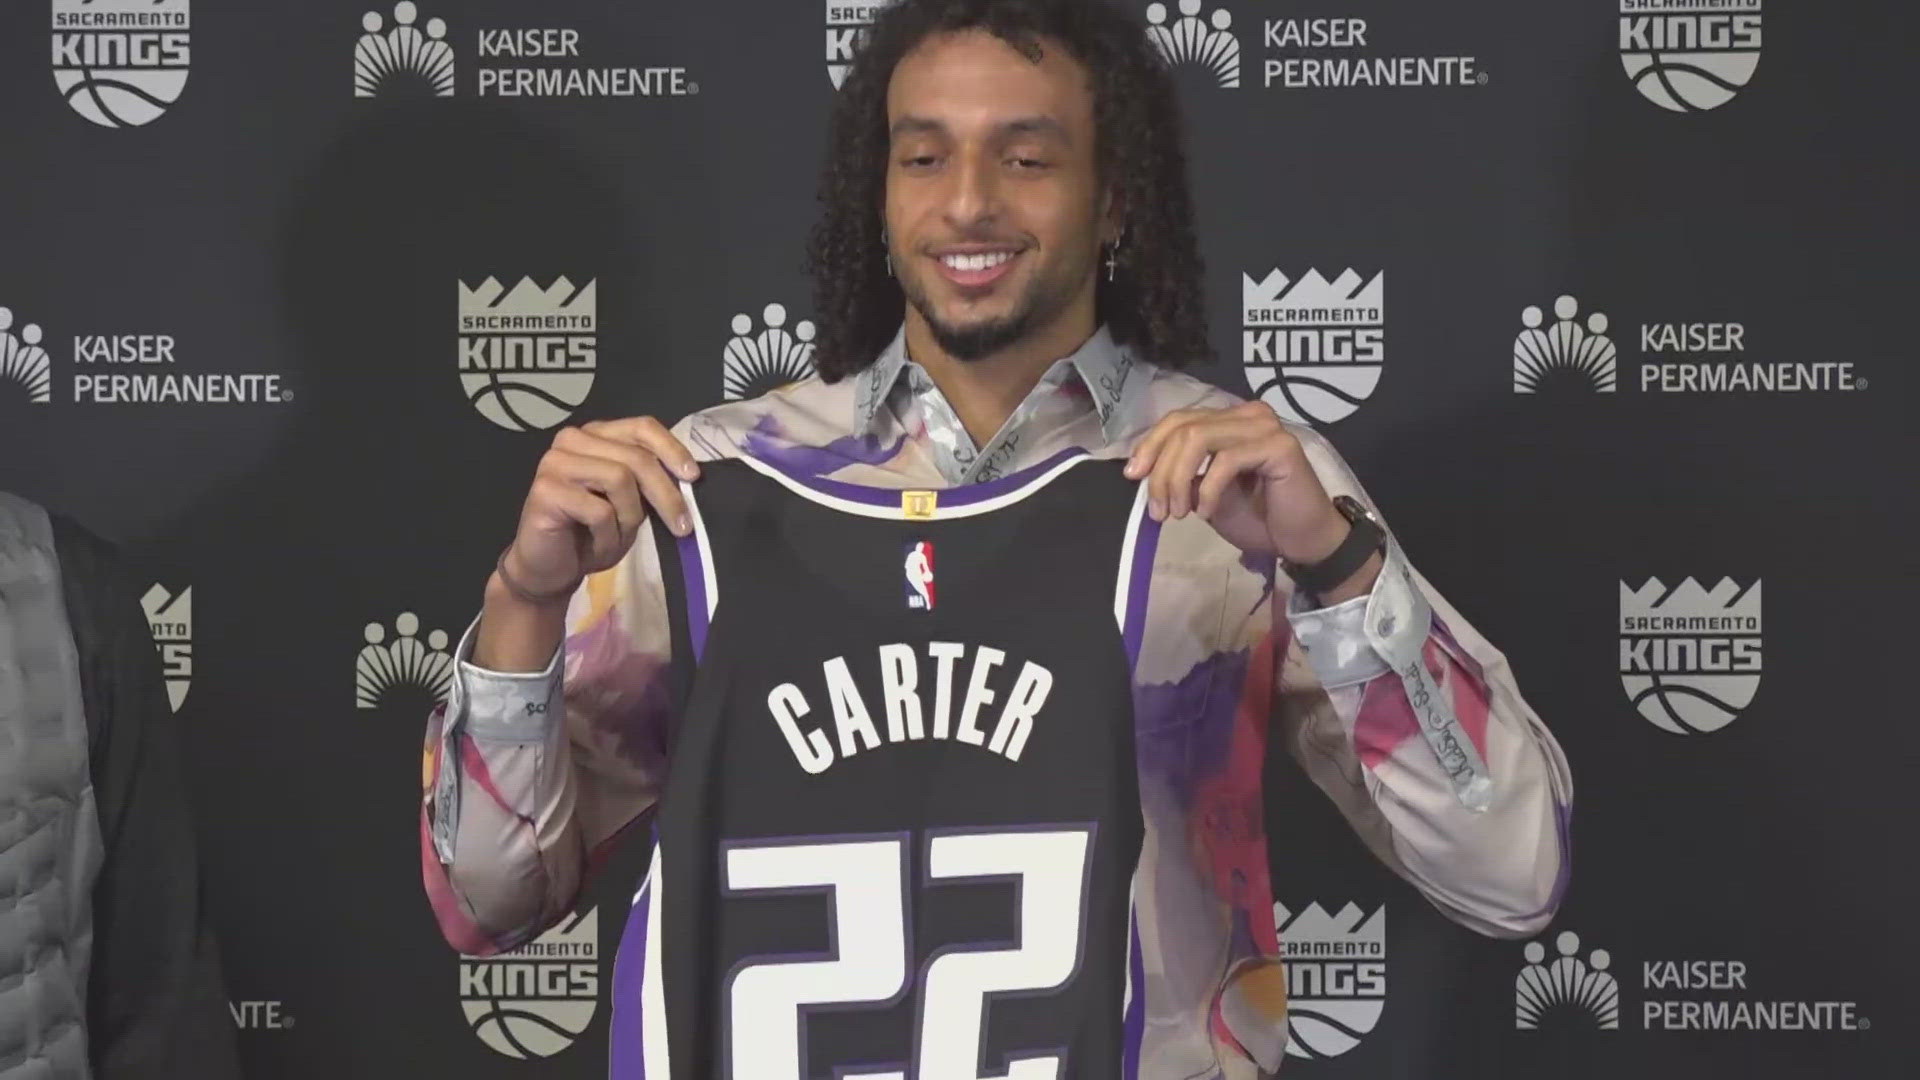 The Sacramento Kings introduced their newest guard Devin Carter, the 13th overall pick of the NBA Draft.